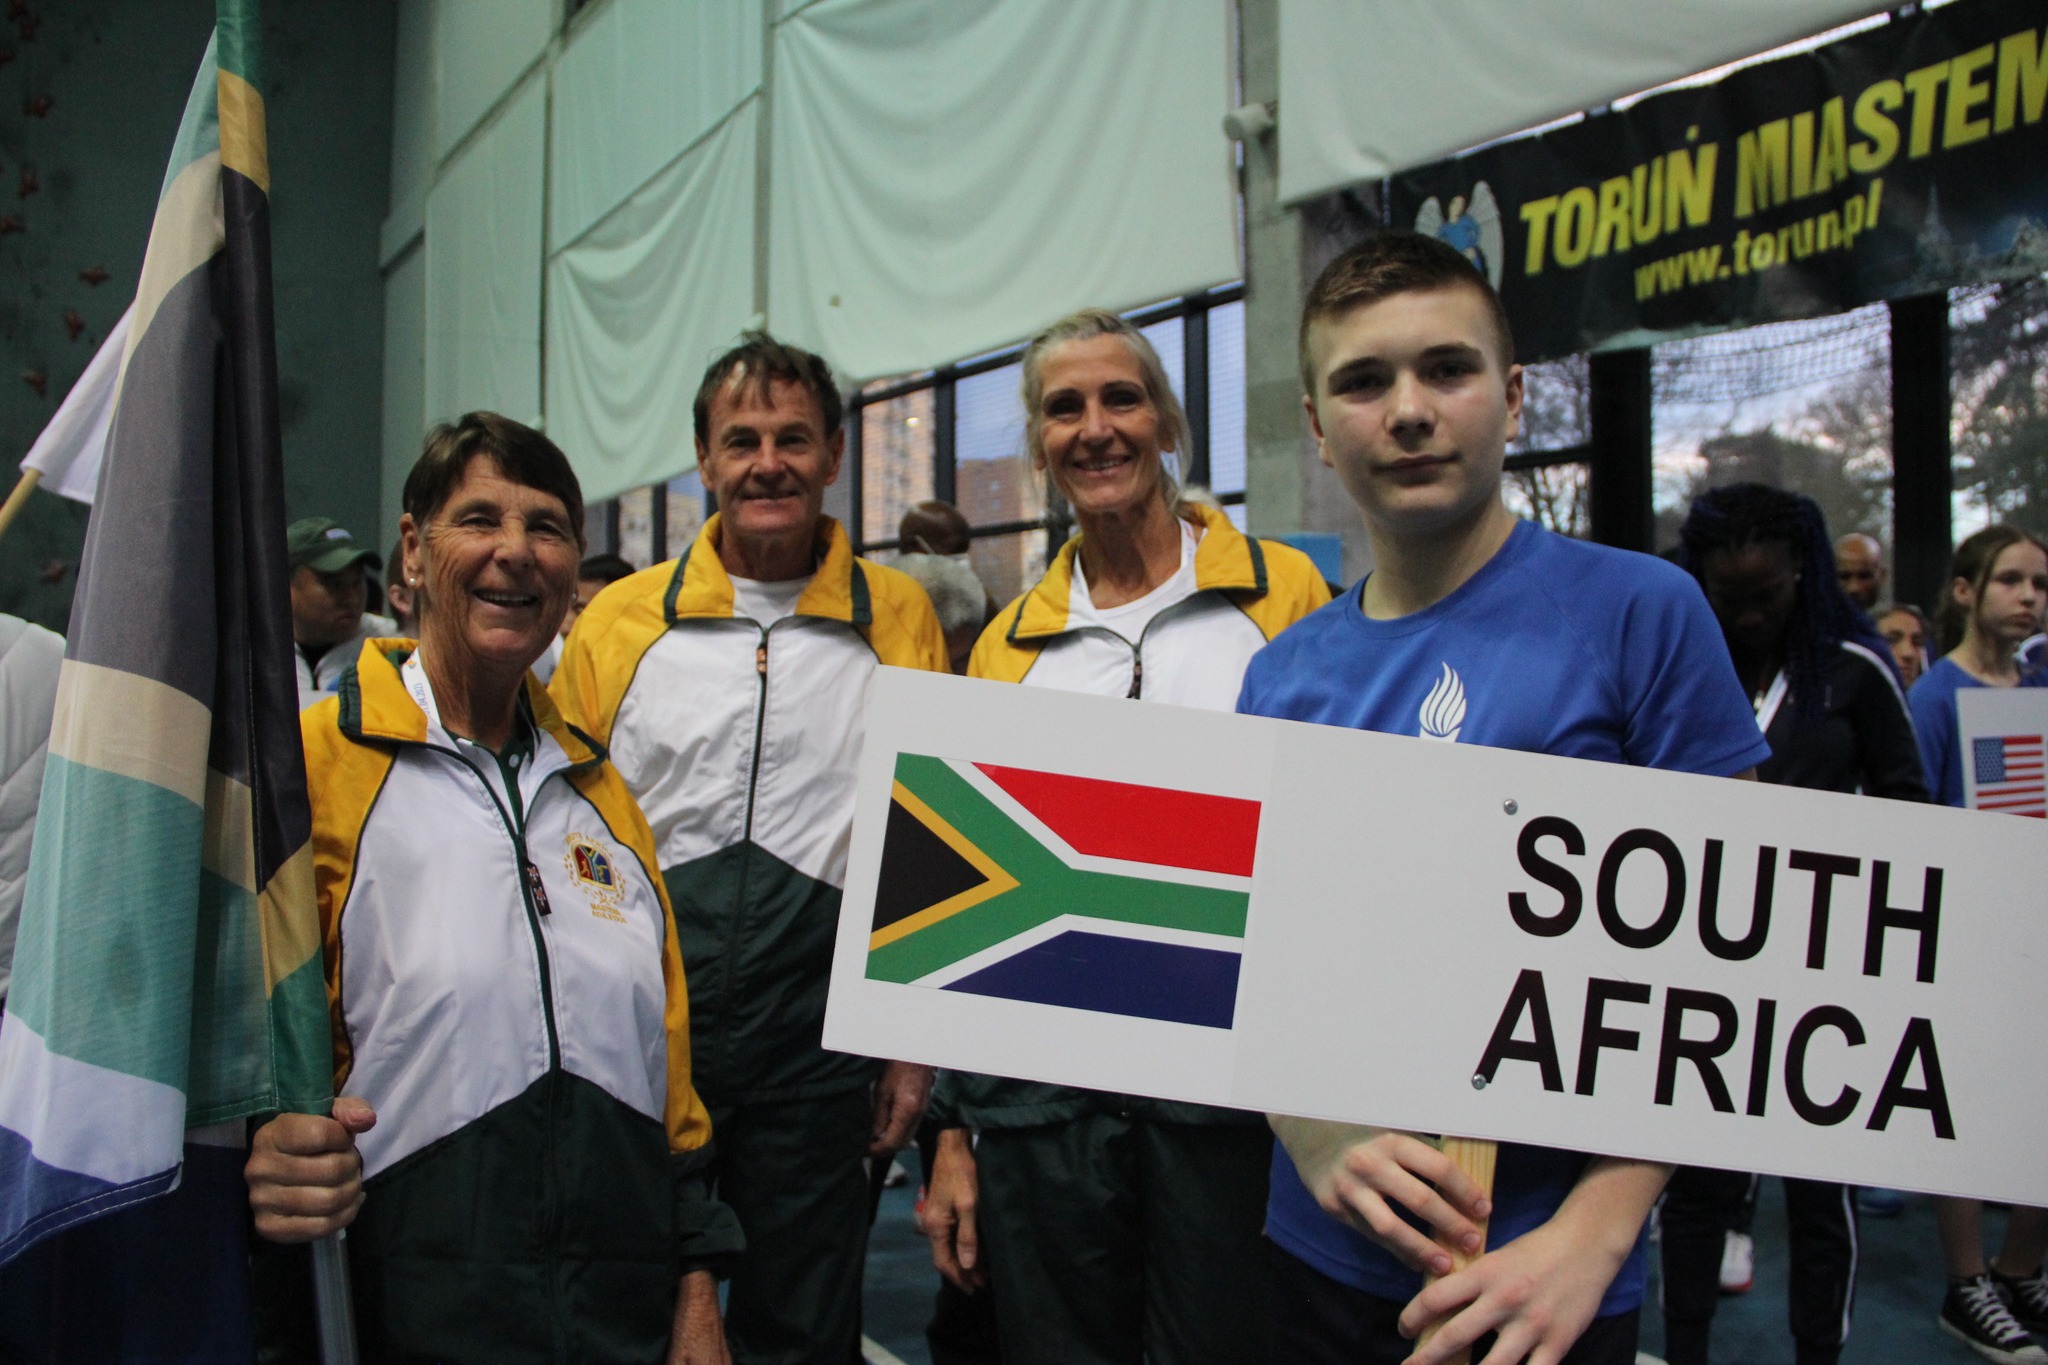 Team South Africa ready for Opening Ceremony. Photo by Sandy Triolo.